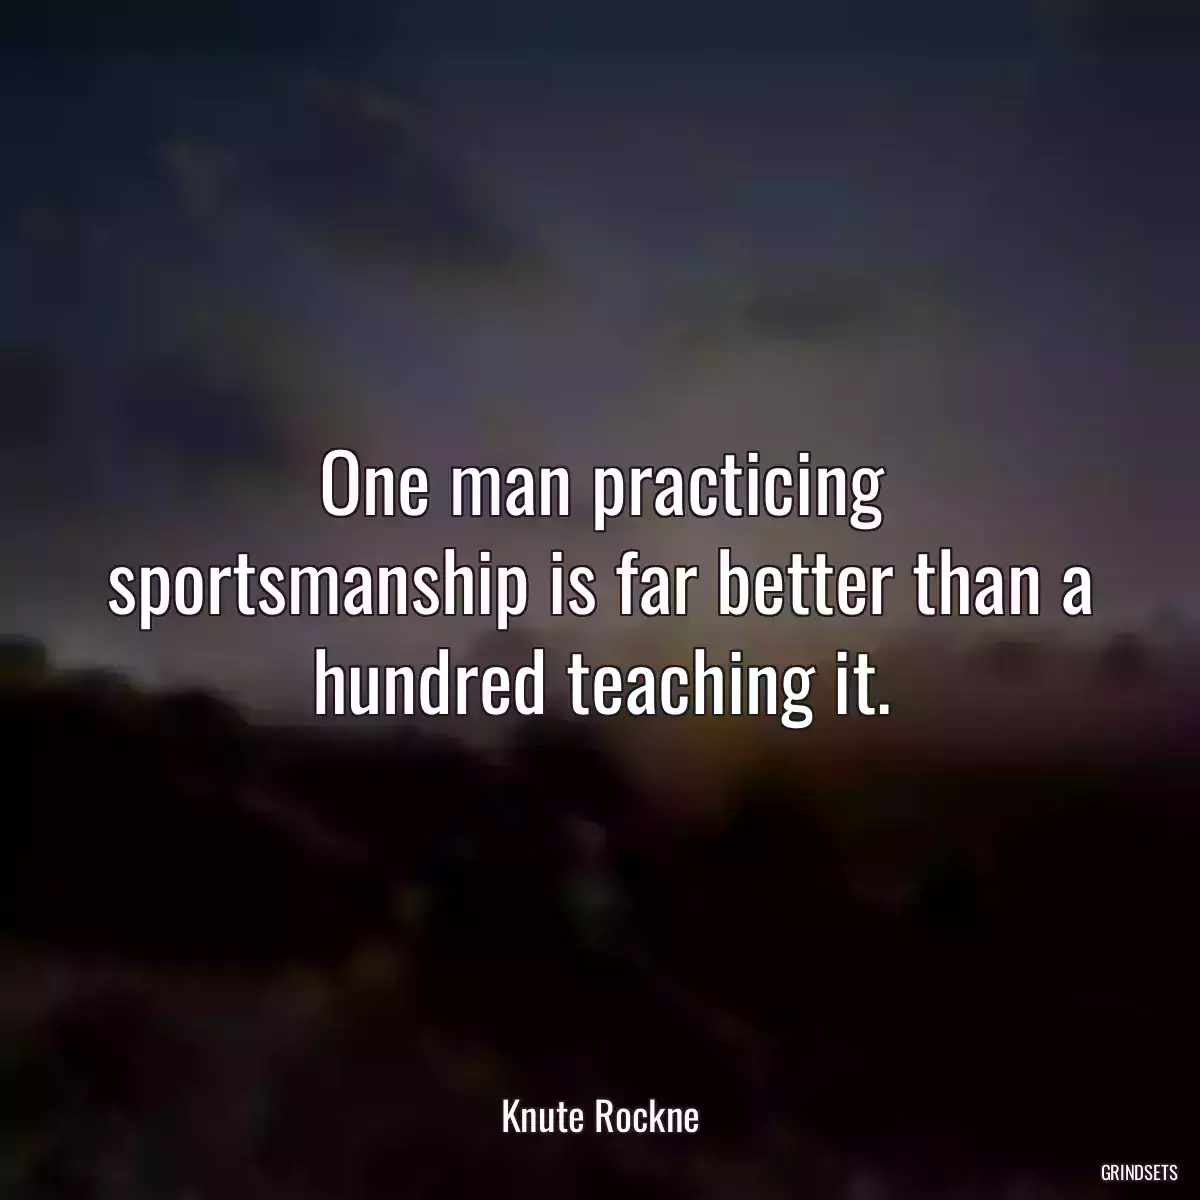 One man practicing sportsmanship is far better than a hundred teaching it.